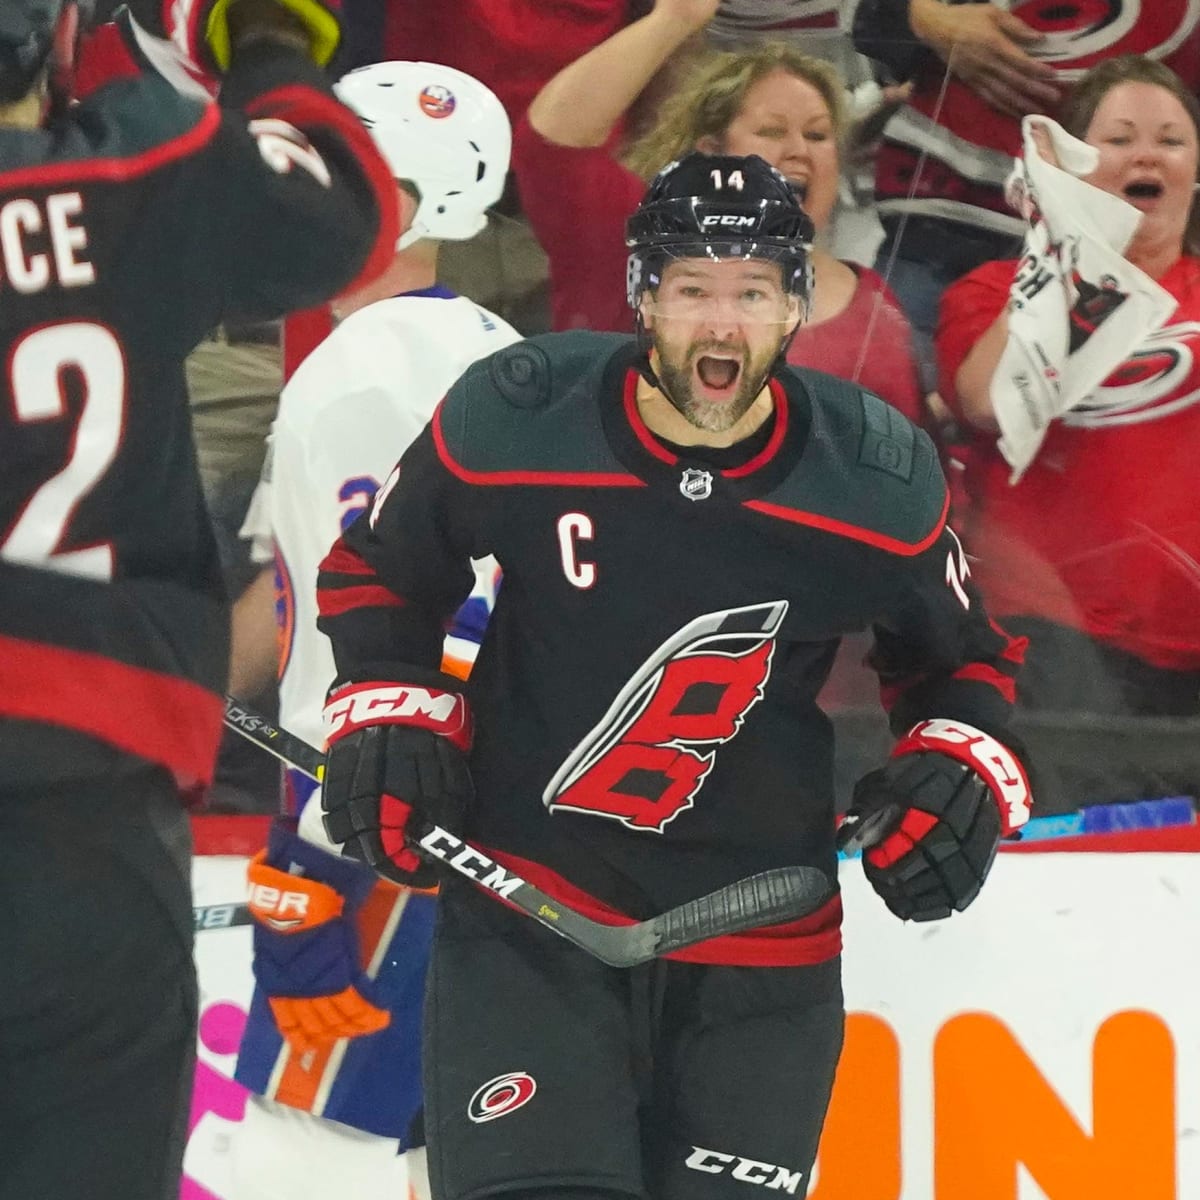 Carolina Hurricanes fans can get a free 'C' on their jerseys courtesy of  Justin Williams